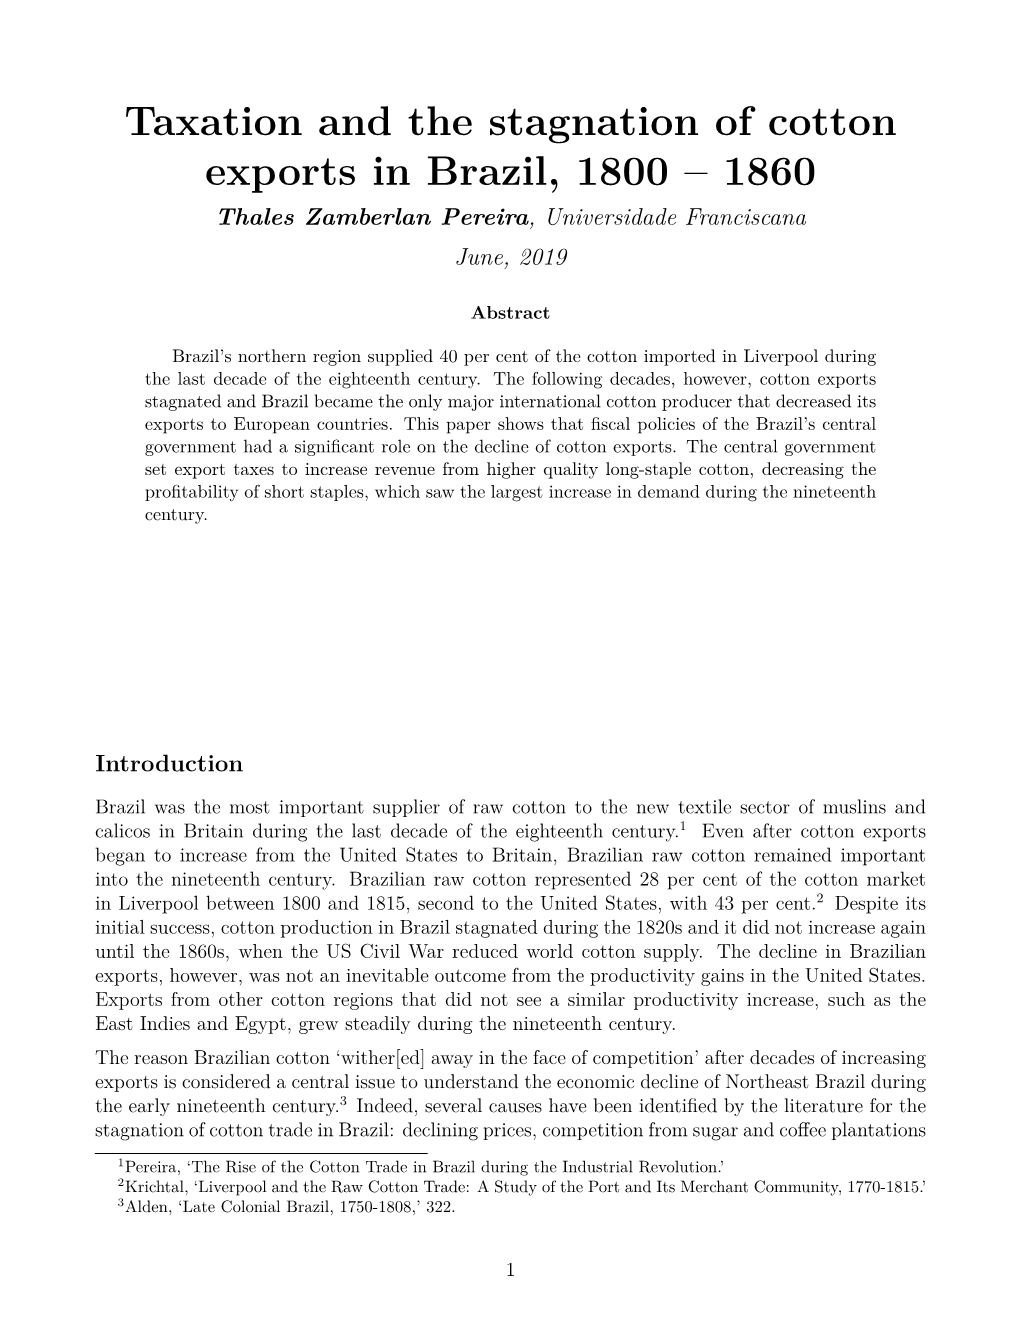 Taxation and the Stagnation of Cotton Exports in Brazil, 1800 – 1860 Thales Zamberlan Pereira, Universidade Franciscana June, 2019